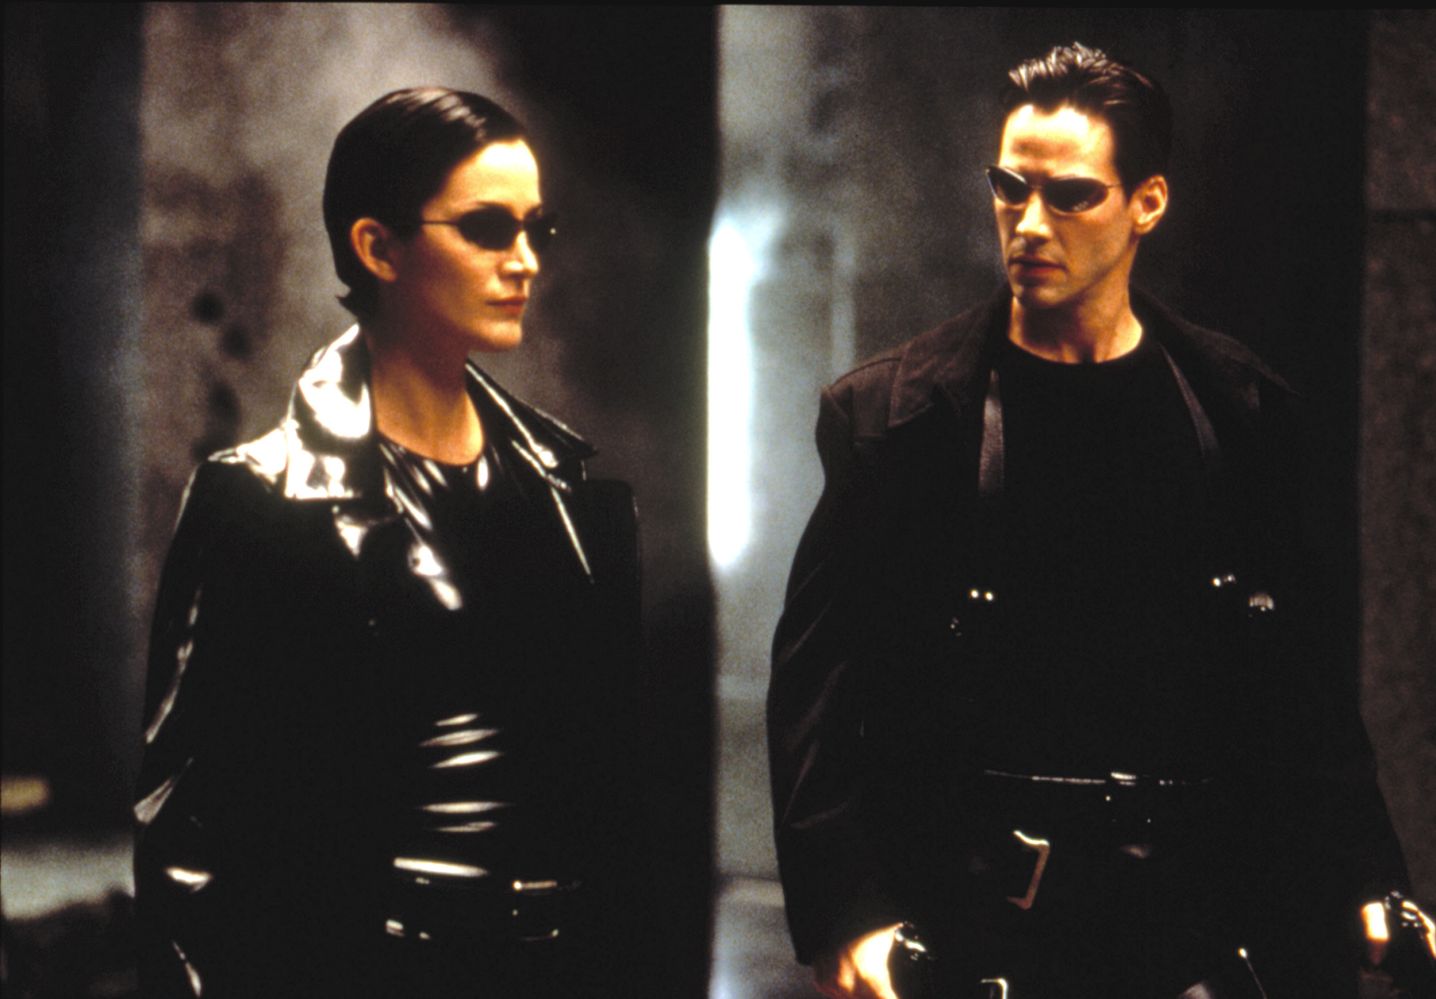 <p>The movie that <a href="https://www.indiewire.com/gallery/the-matrix-anniversary-trivia-facts/">changed Hollywood filmmaking forever</a> recently celebrated its 25th anniversary, and the Wachowskis’ landmark blockbuster remains as groundbreaking as ever. The language and iconography of ‘The Matrix’ has permeated pop culture on such a deep level that it’s easy to forget how thrilling the film is as a standalone work, and its sequel ‘The Matrix Reloaded’ remains an underrated franchise entry. With news that Warner Bros. is <a href="https://www.indiewire.com/news/breaking-news/new-the-matrix-drew-goddard-warner-bros-1234970525/">prepping a fifth ‘Matrix’ film</a>, it’s a great time to revisit the original trilogy when they come to Netflix this month.</p>